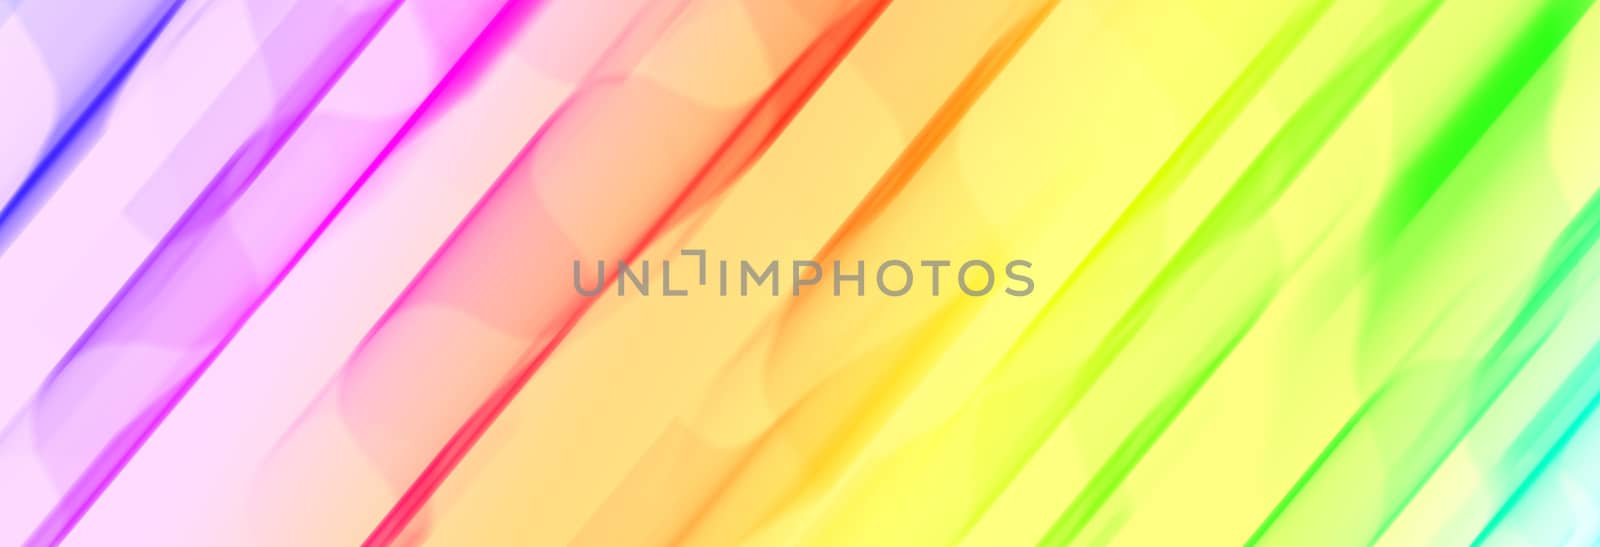 Rainbow colors abstract background for web design. Colorful spectrum gradient.